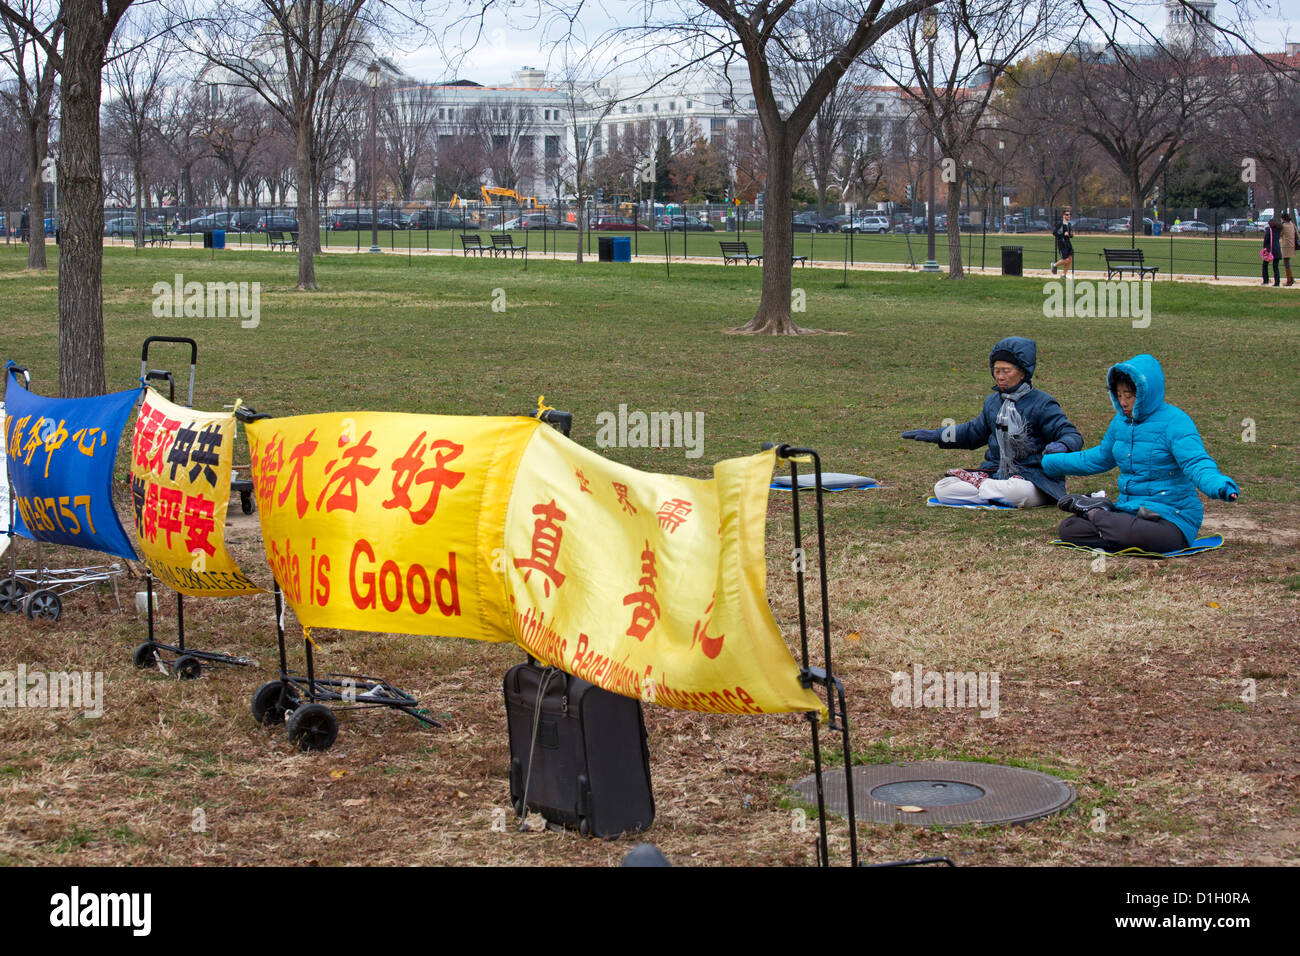 Washington, DC - Falun Gong practitioners meditate on the national mall. Stock Photo